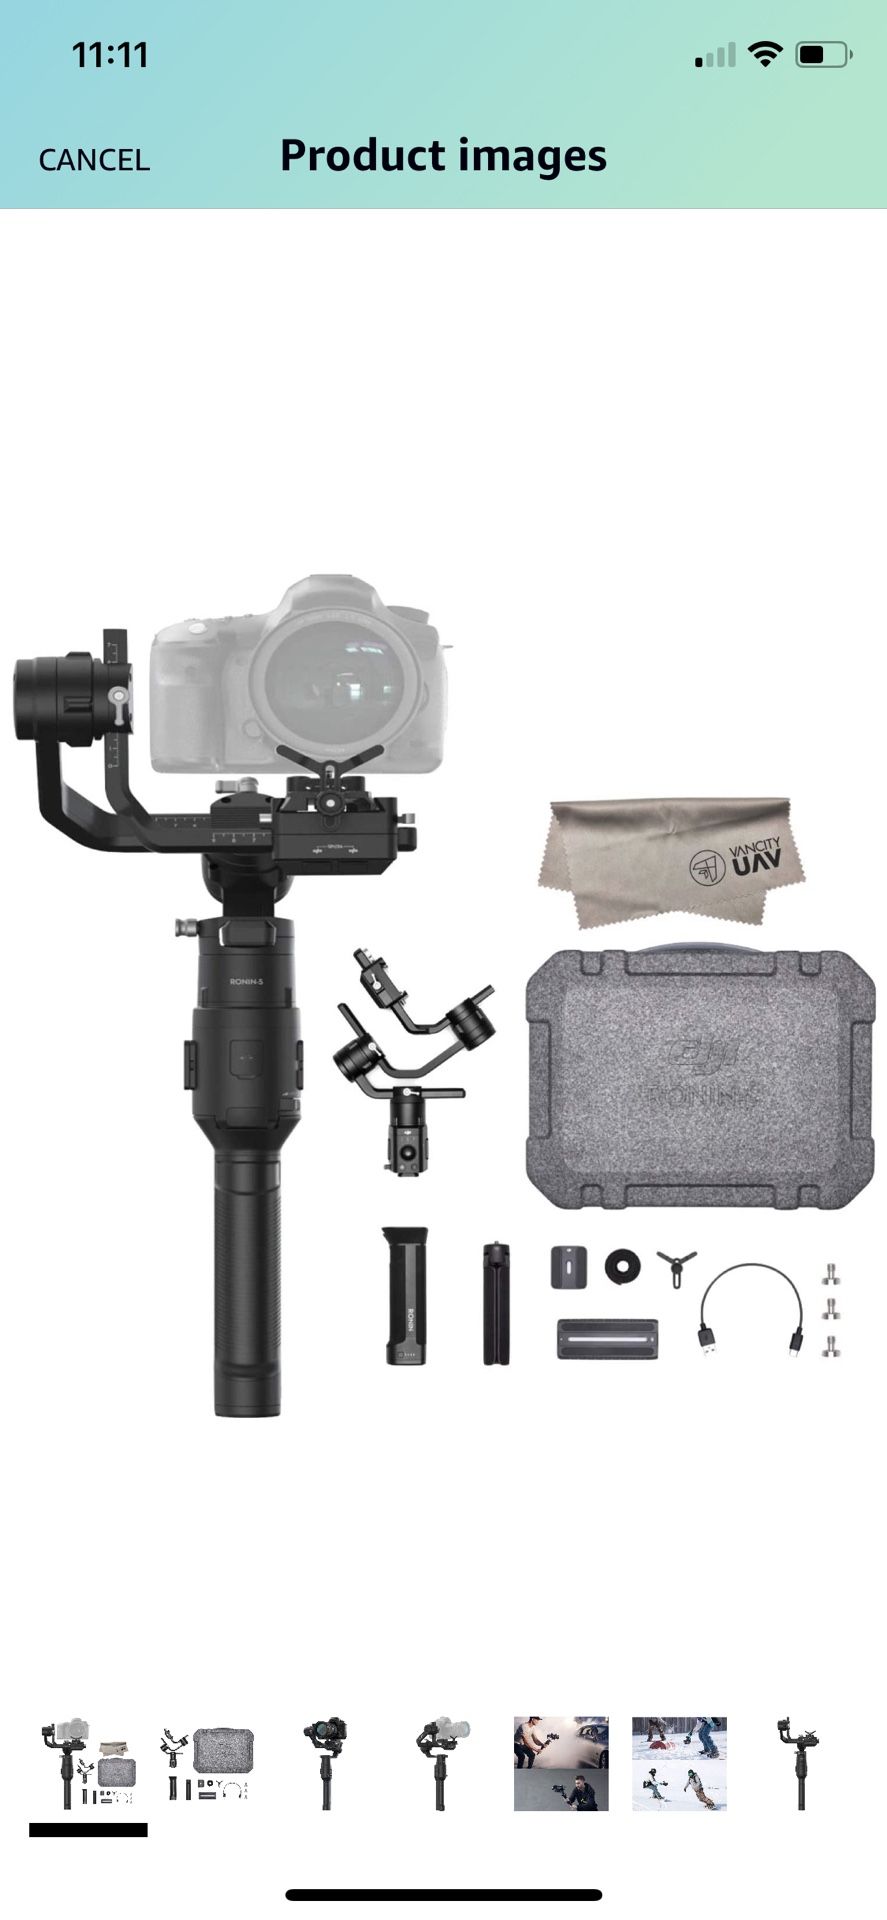 2019 DJI Ronin-S Essentials Kit 3-Axis Gimbal Stabilizer for Mirrorless and DSLR Cameras